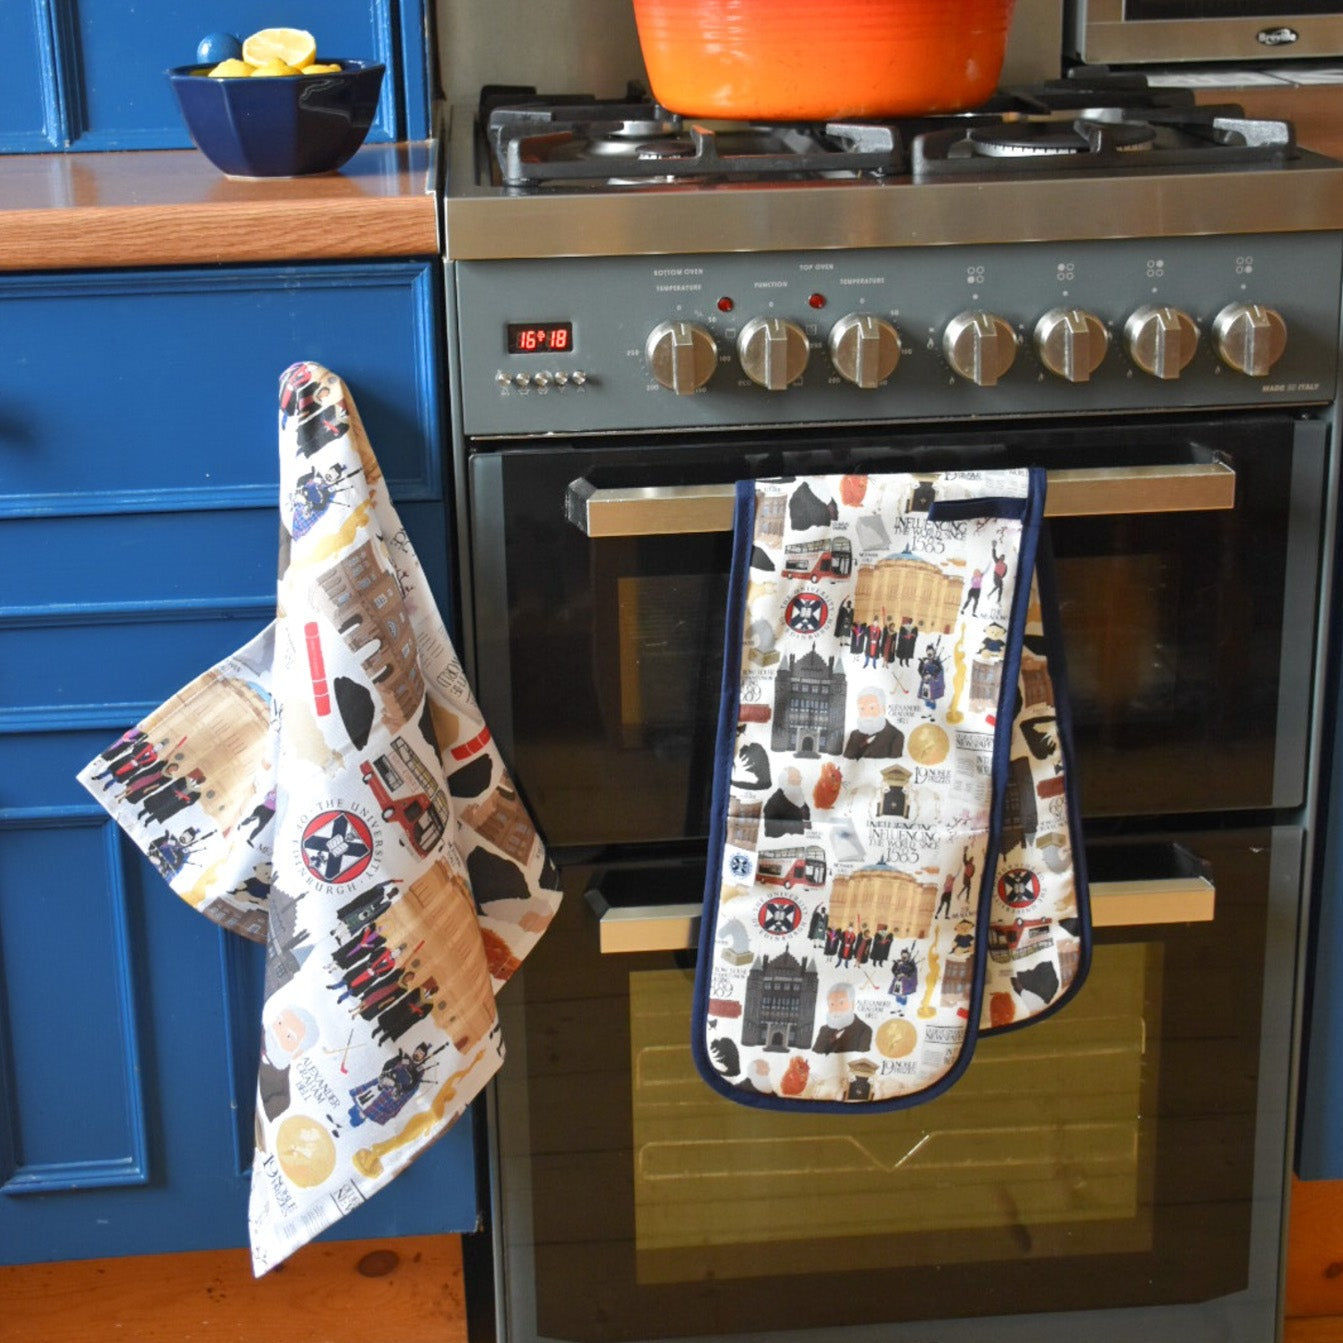 Kitchen visual background with Heritage Collection Tea Towel and Heritage Collection Oven Gloves presented.